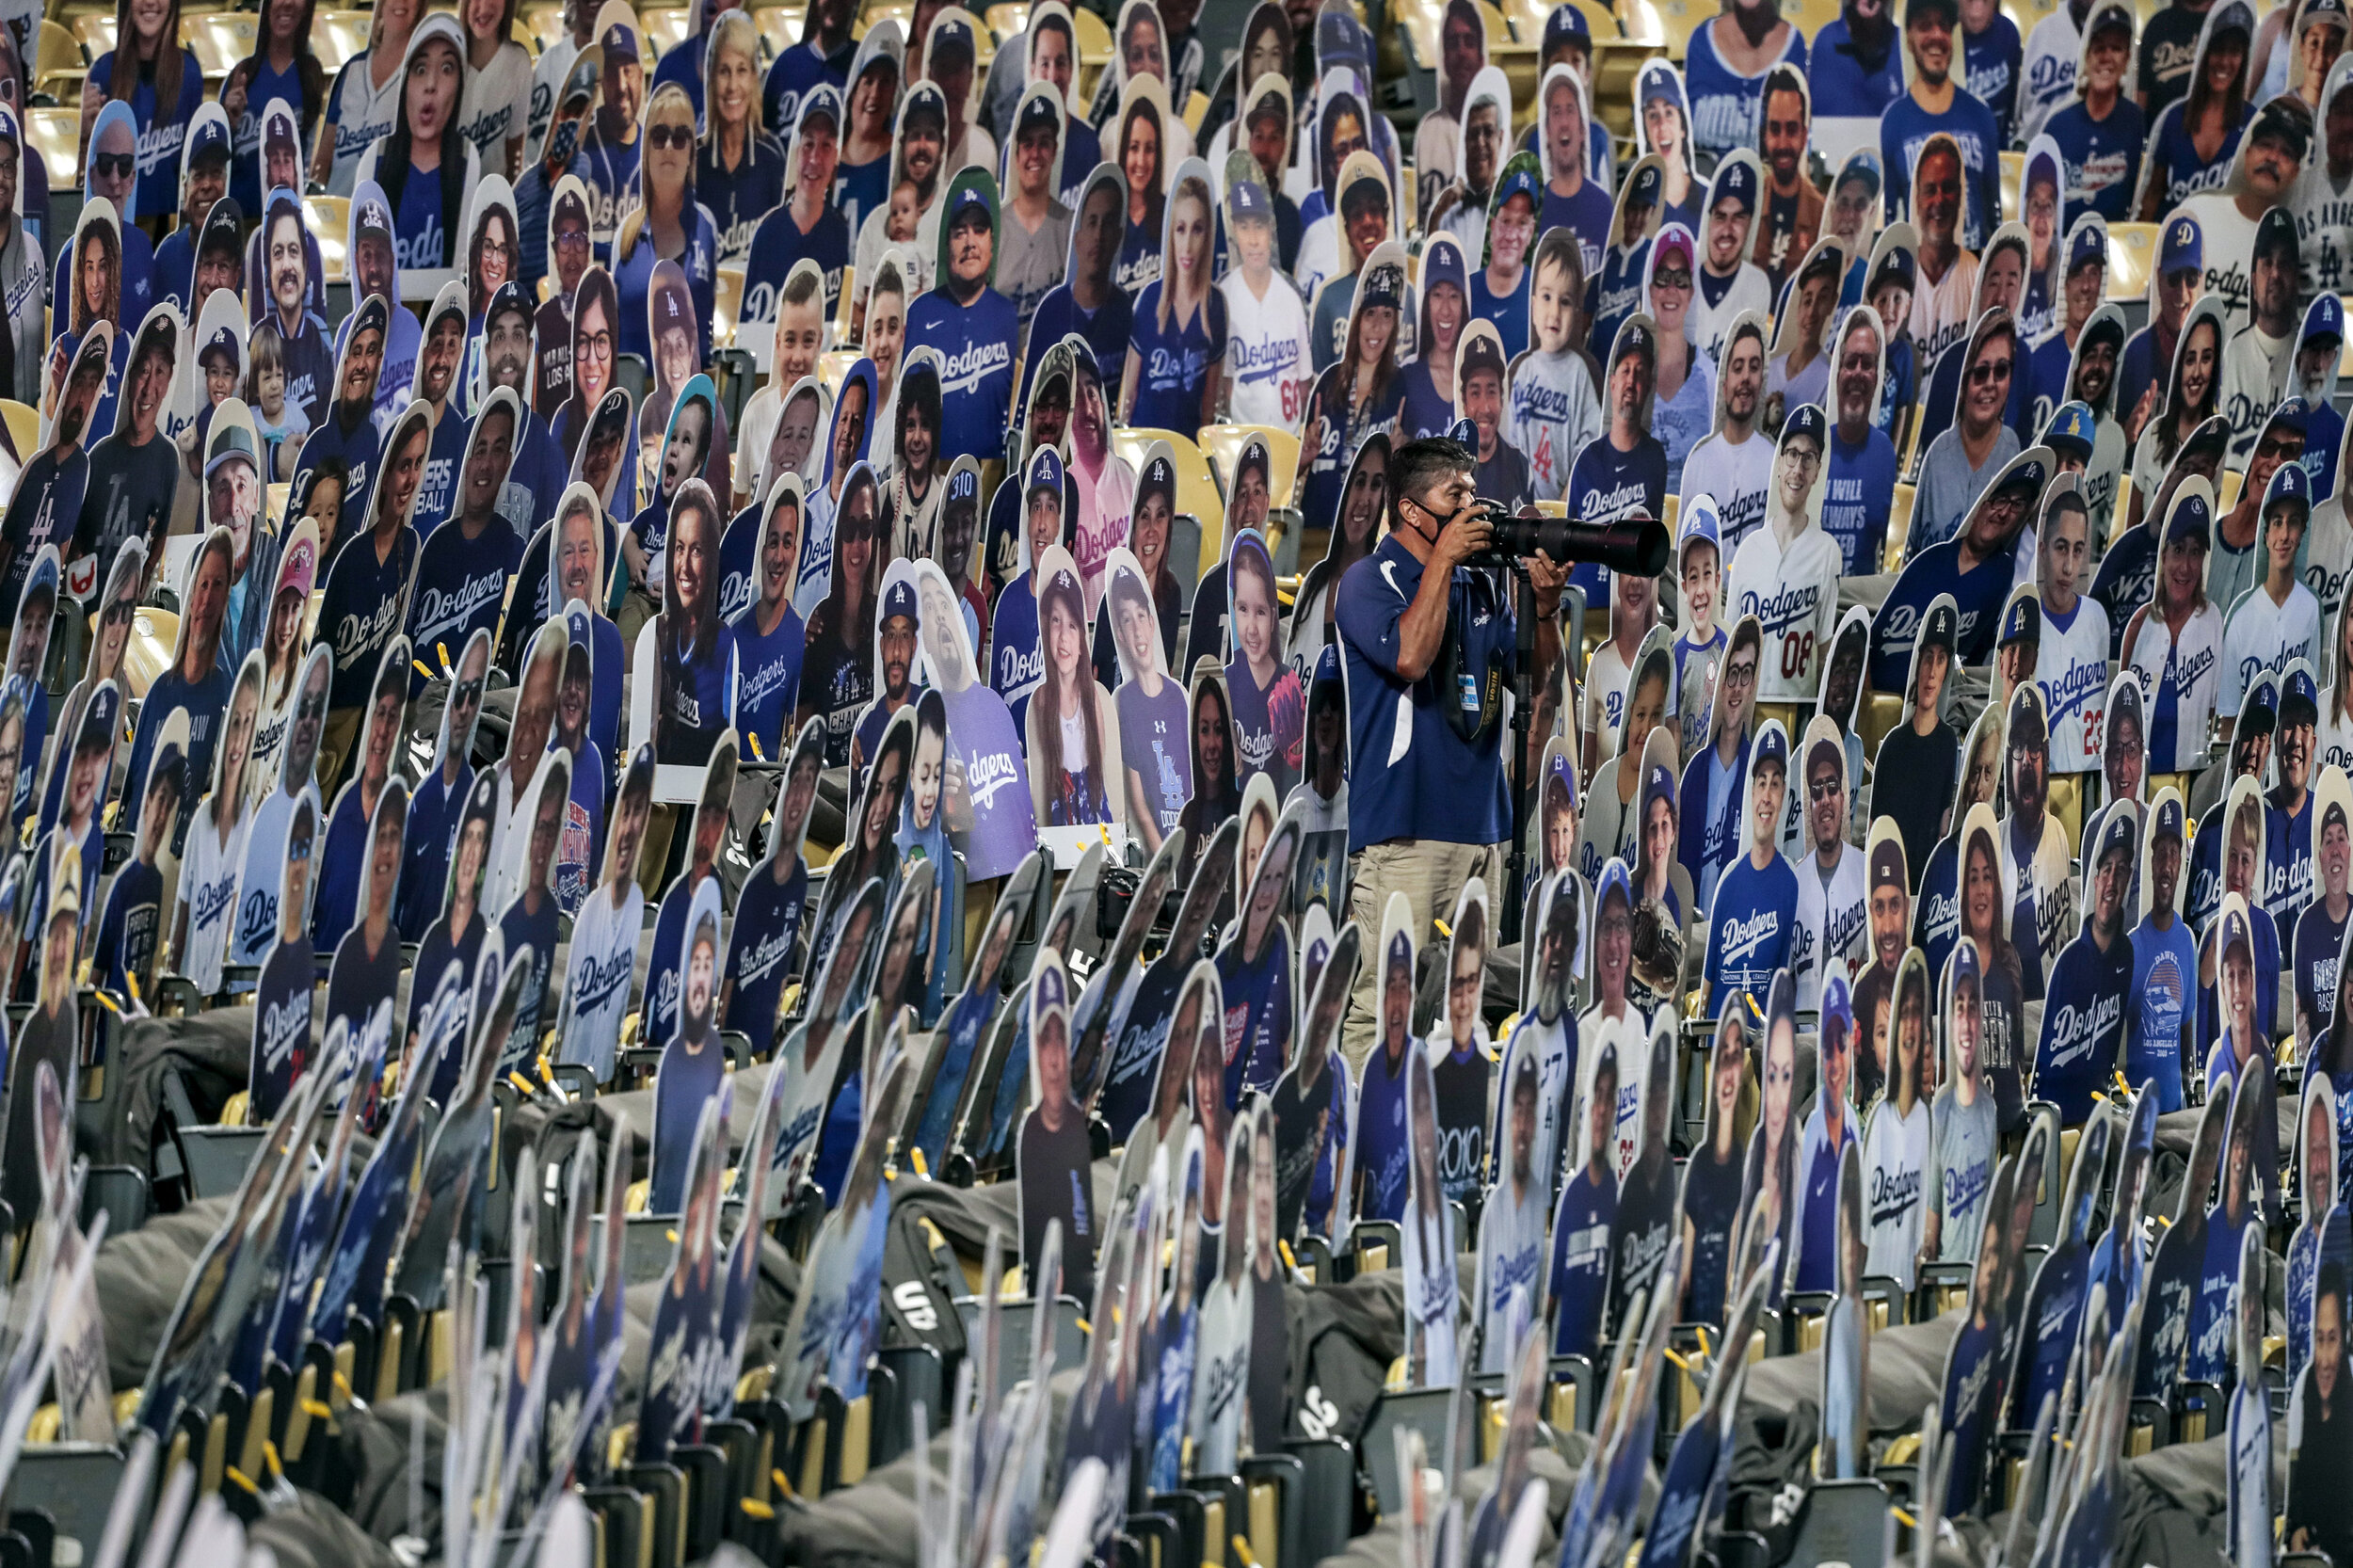  Los Angeles, CA, Sunday July 26, 2020 - Dodgers team photographer Juan Ocampo photographs the action from field level seats occupied by hundreds of fan photos during a game against the Giants at Dodger Stadium.  